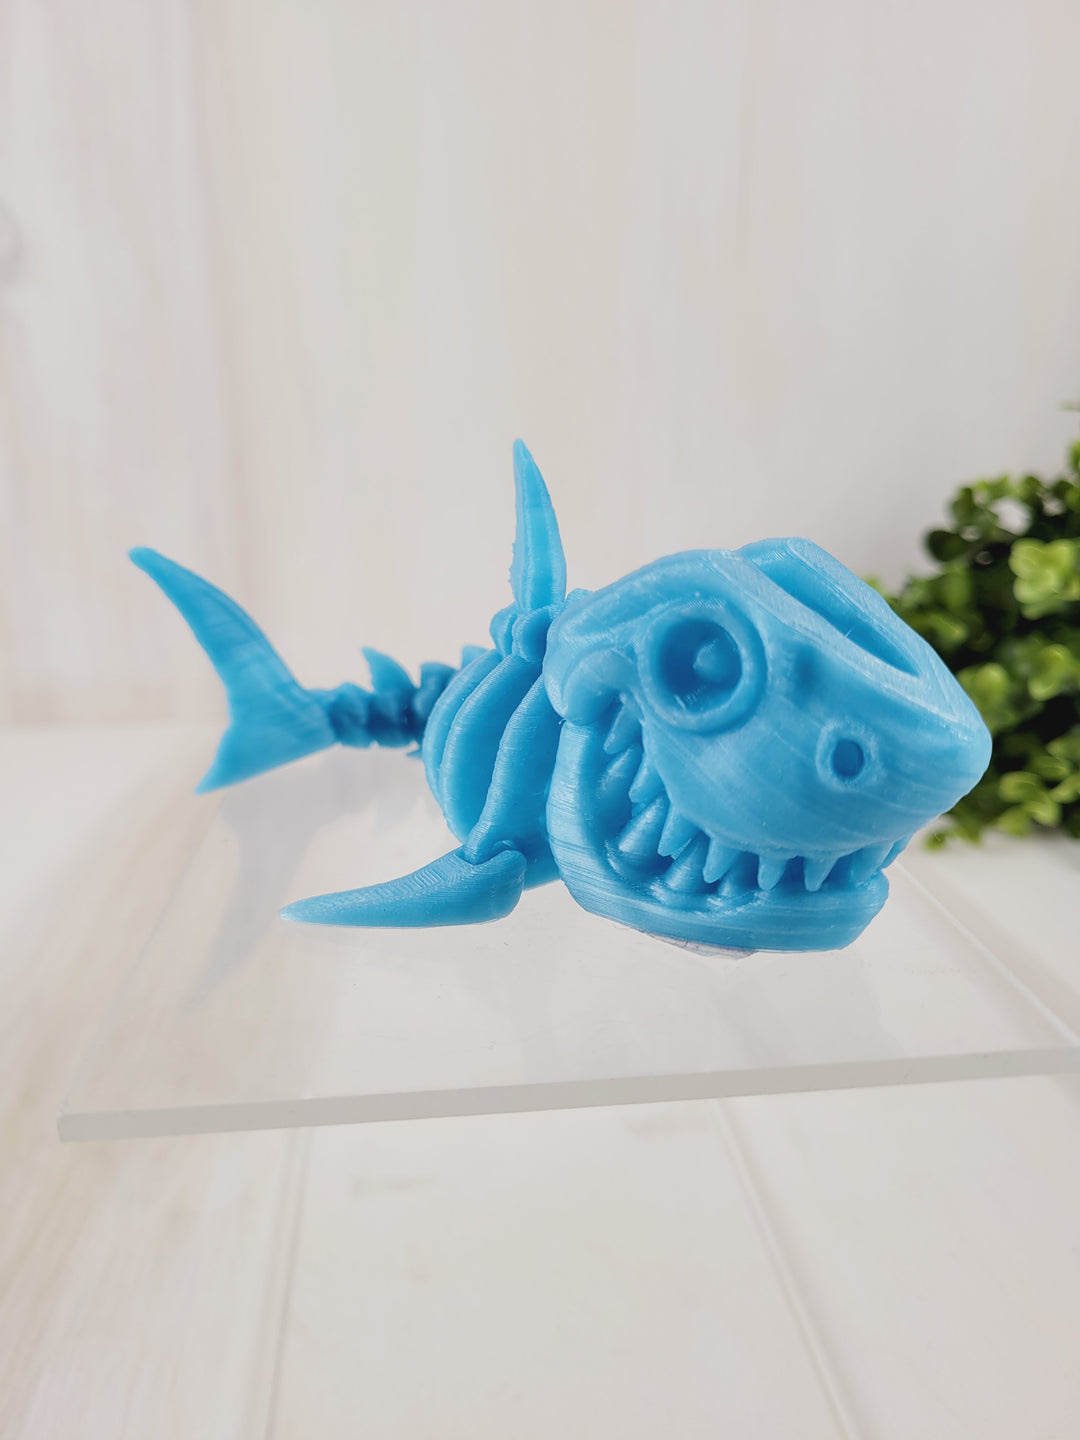 AB3D, 3D Printed Articulating Water Creature Toys